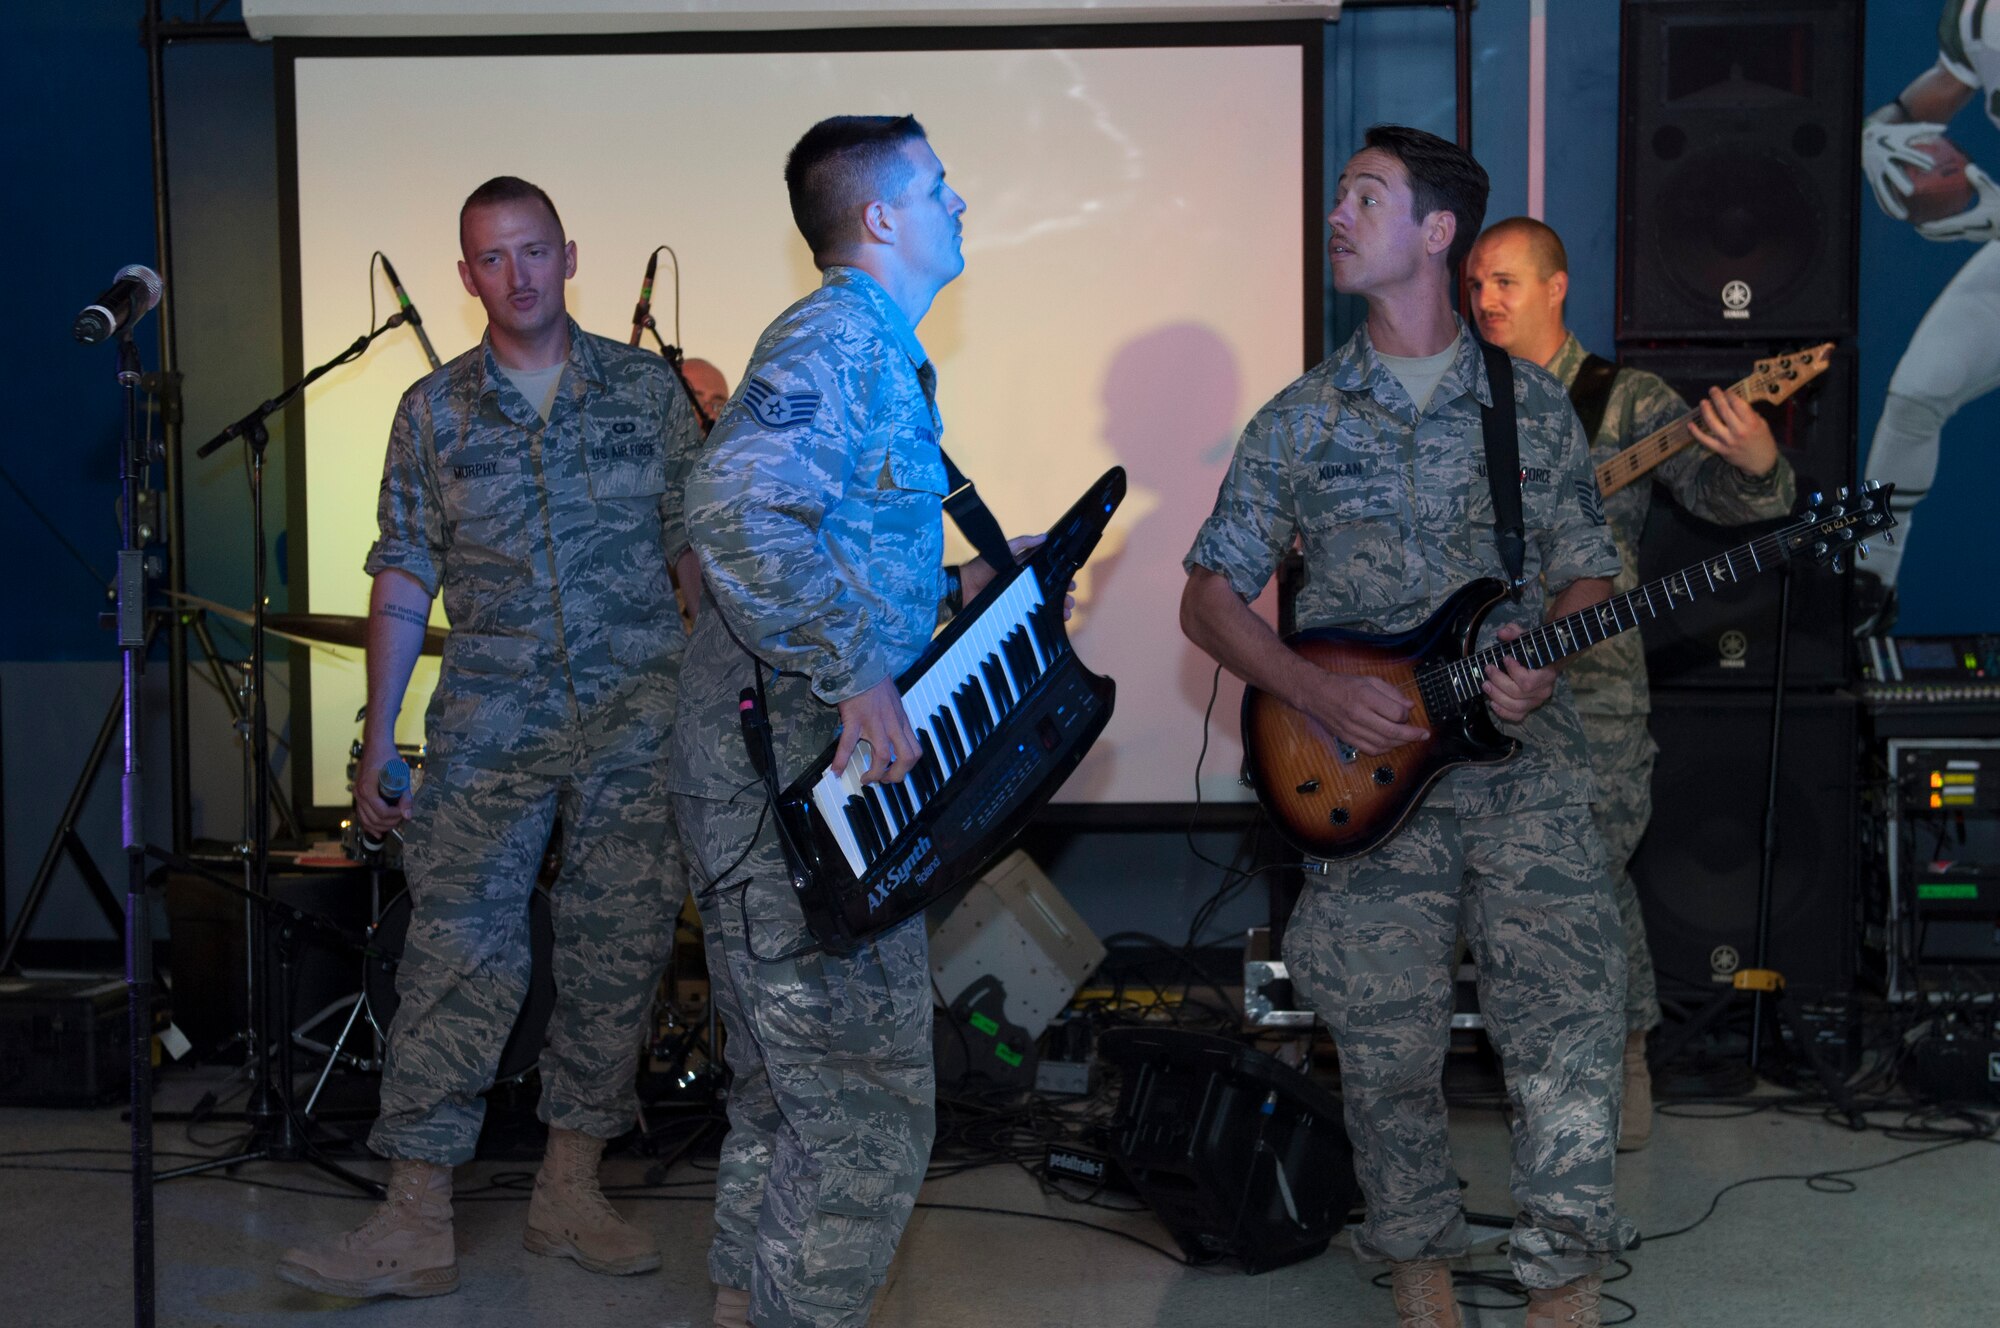 Staff Sgt. Chip Cothran, piano player and Tech. Sgt. Johnny Kukan, lead guitarist engages in a friendly challenge trying to best each other while playing. Starlifter is a seven-member group of talented musicians that performs in virtually every musical idiom and was here in support of Operation Enduring Freedom. (U.S. Air Force photo by Senior Master Sgt. Allison Day)